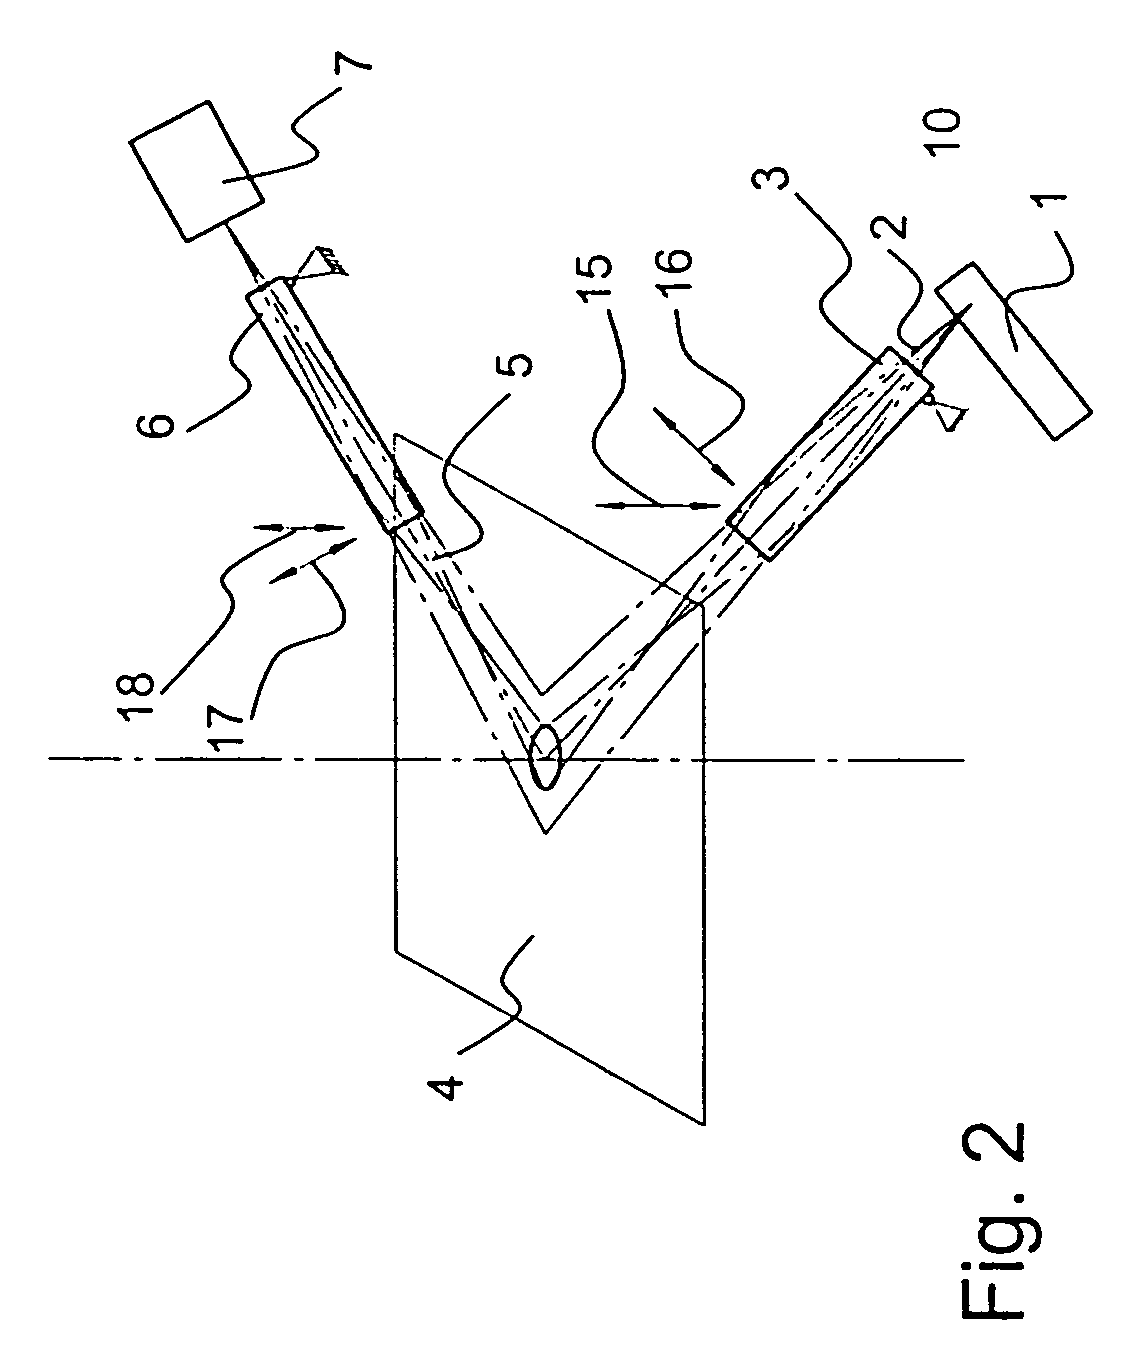 X-ray optical system with wobble device